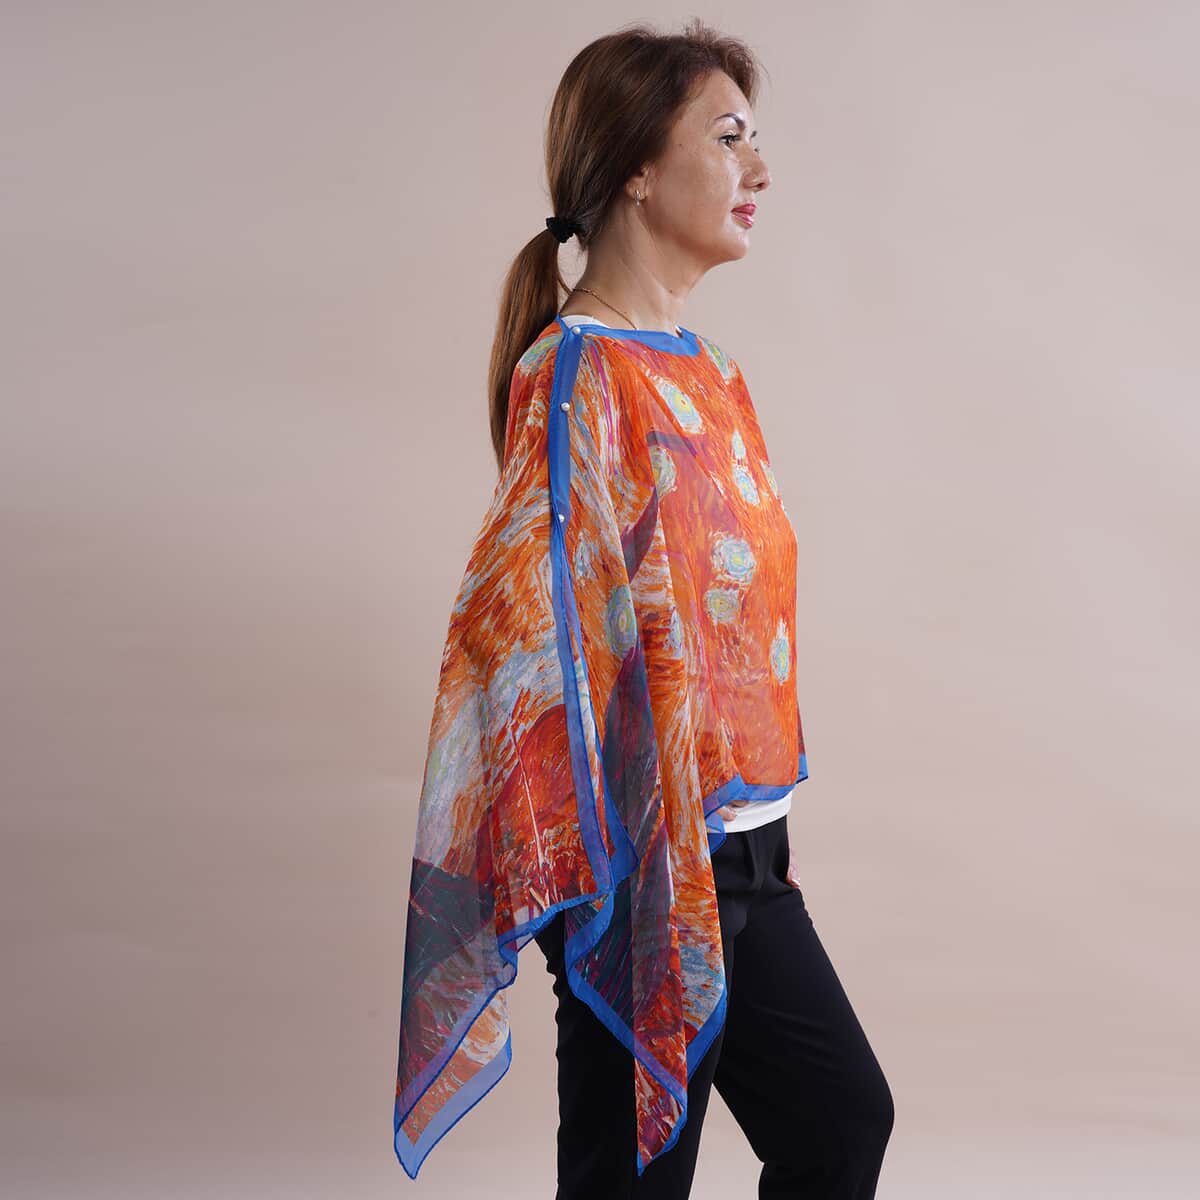 All in One Orange Floral Brush Stroke Chiffon Tunic (One Size Fits Most) image number 2